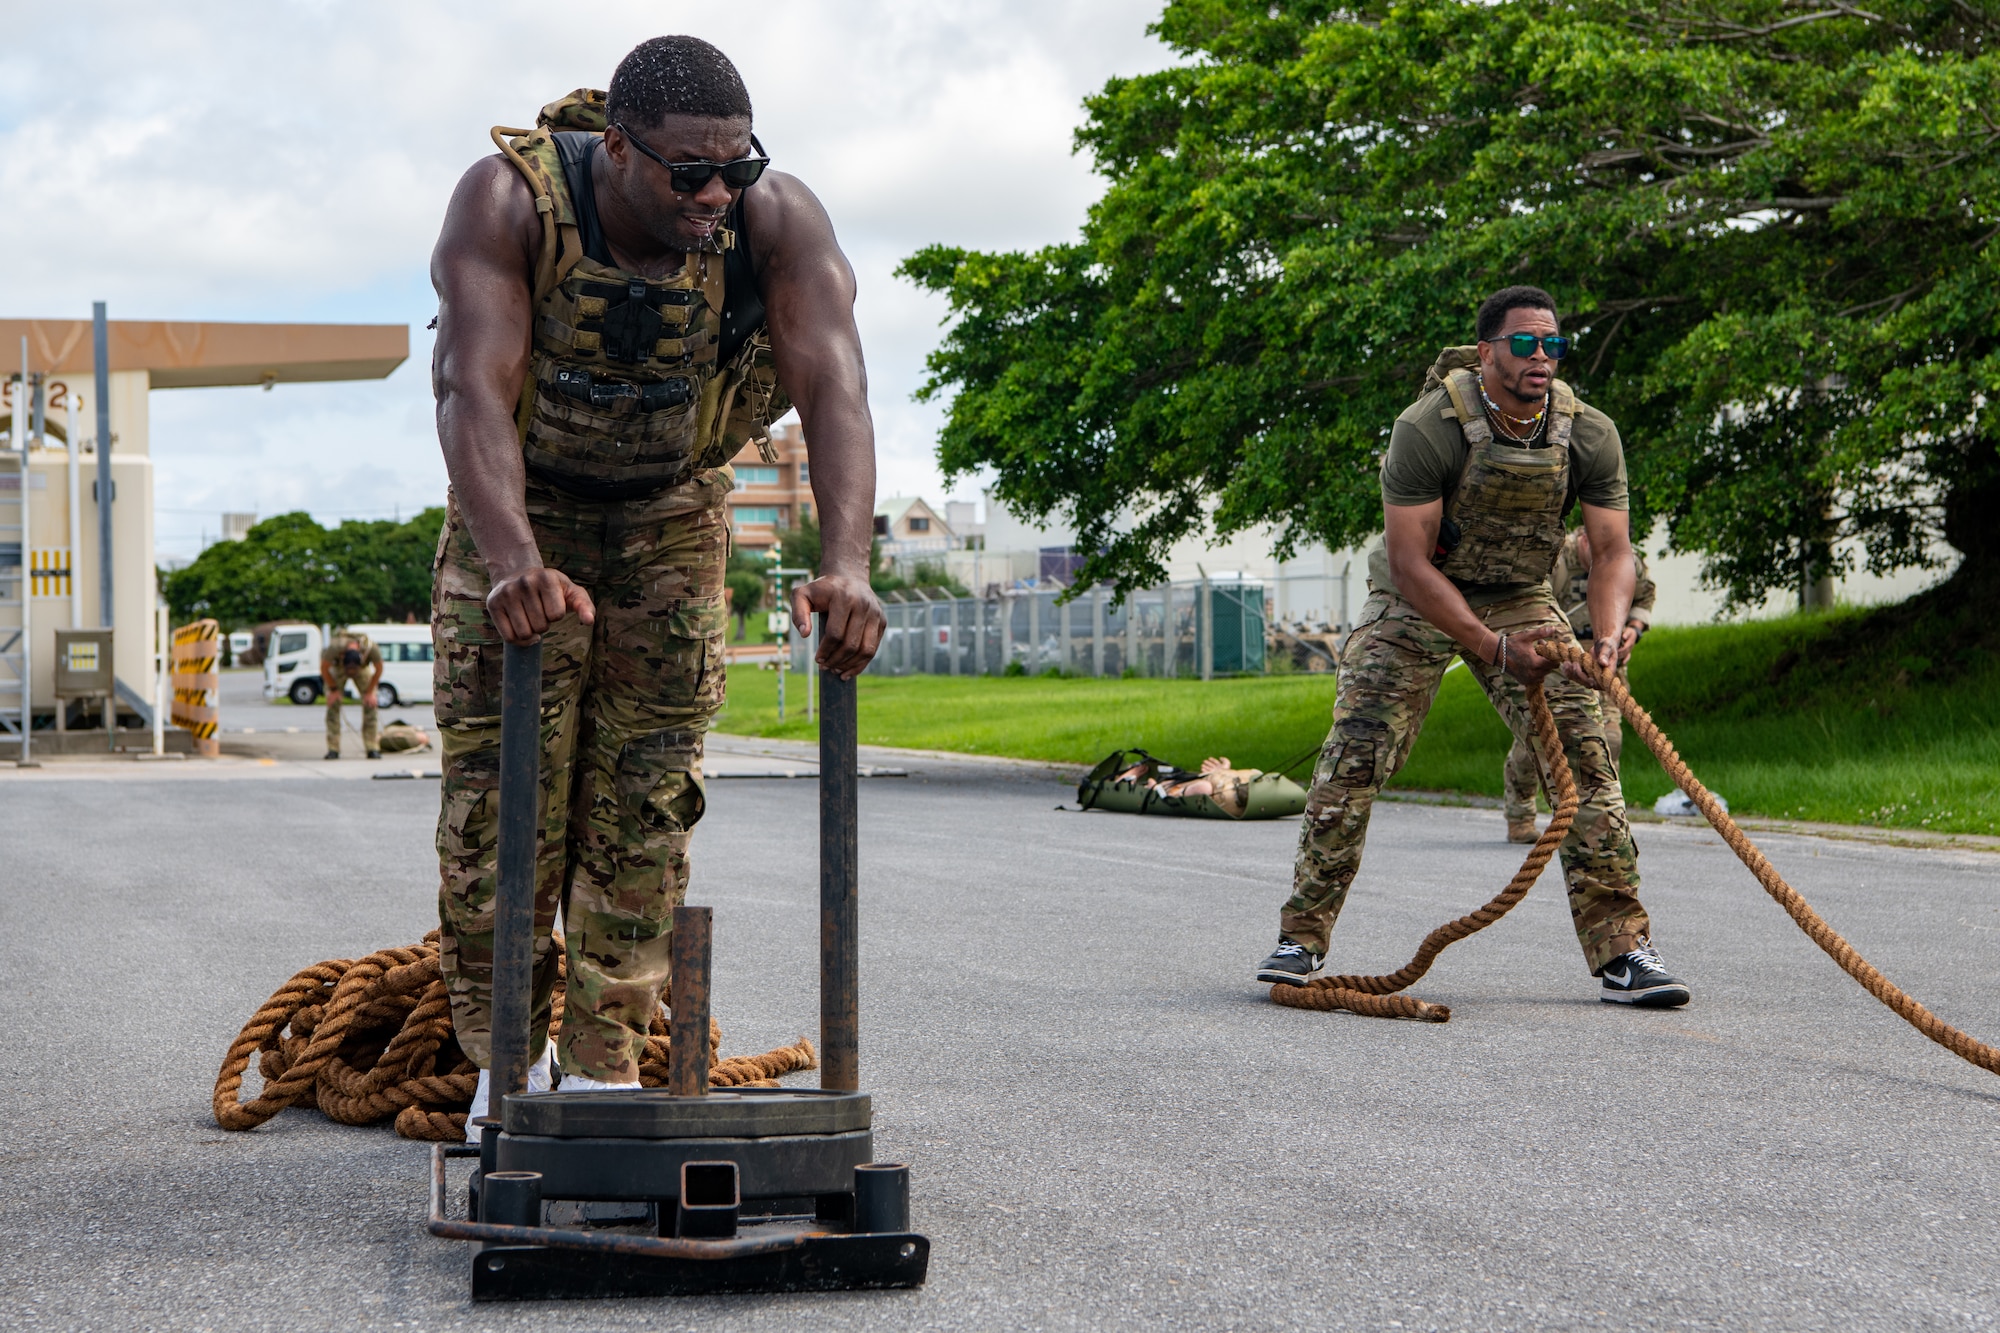 A man on the left pushes weights; A man on the right, pulls a rope.